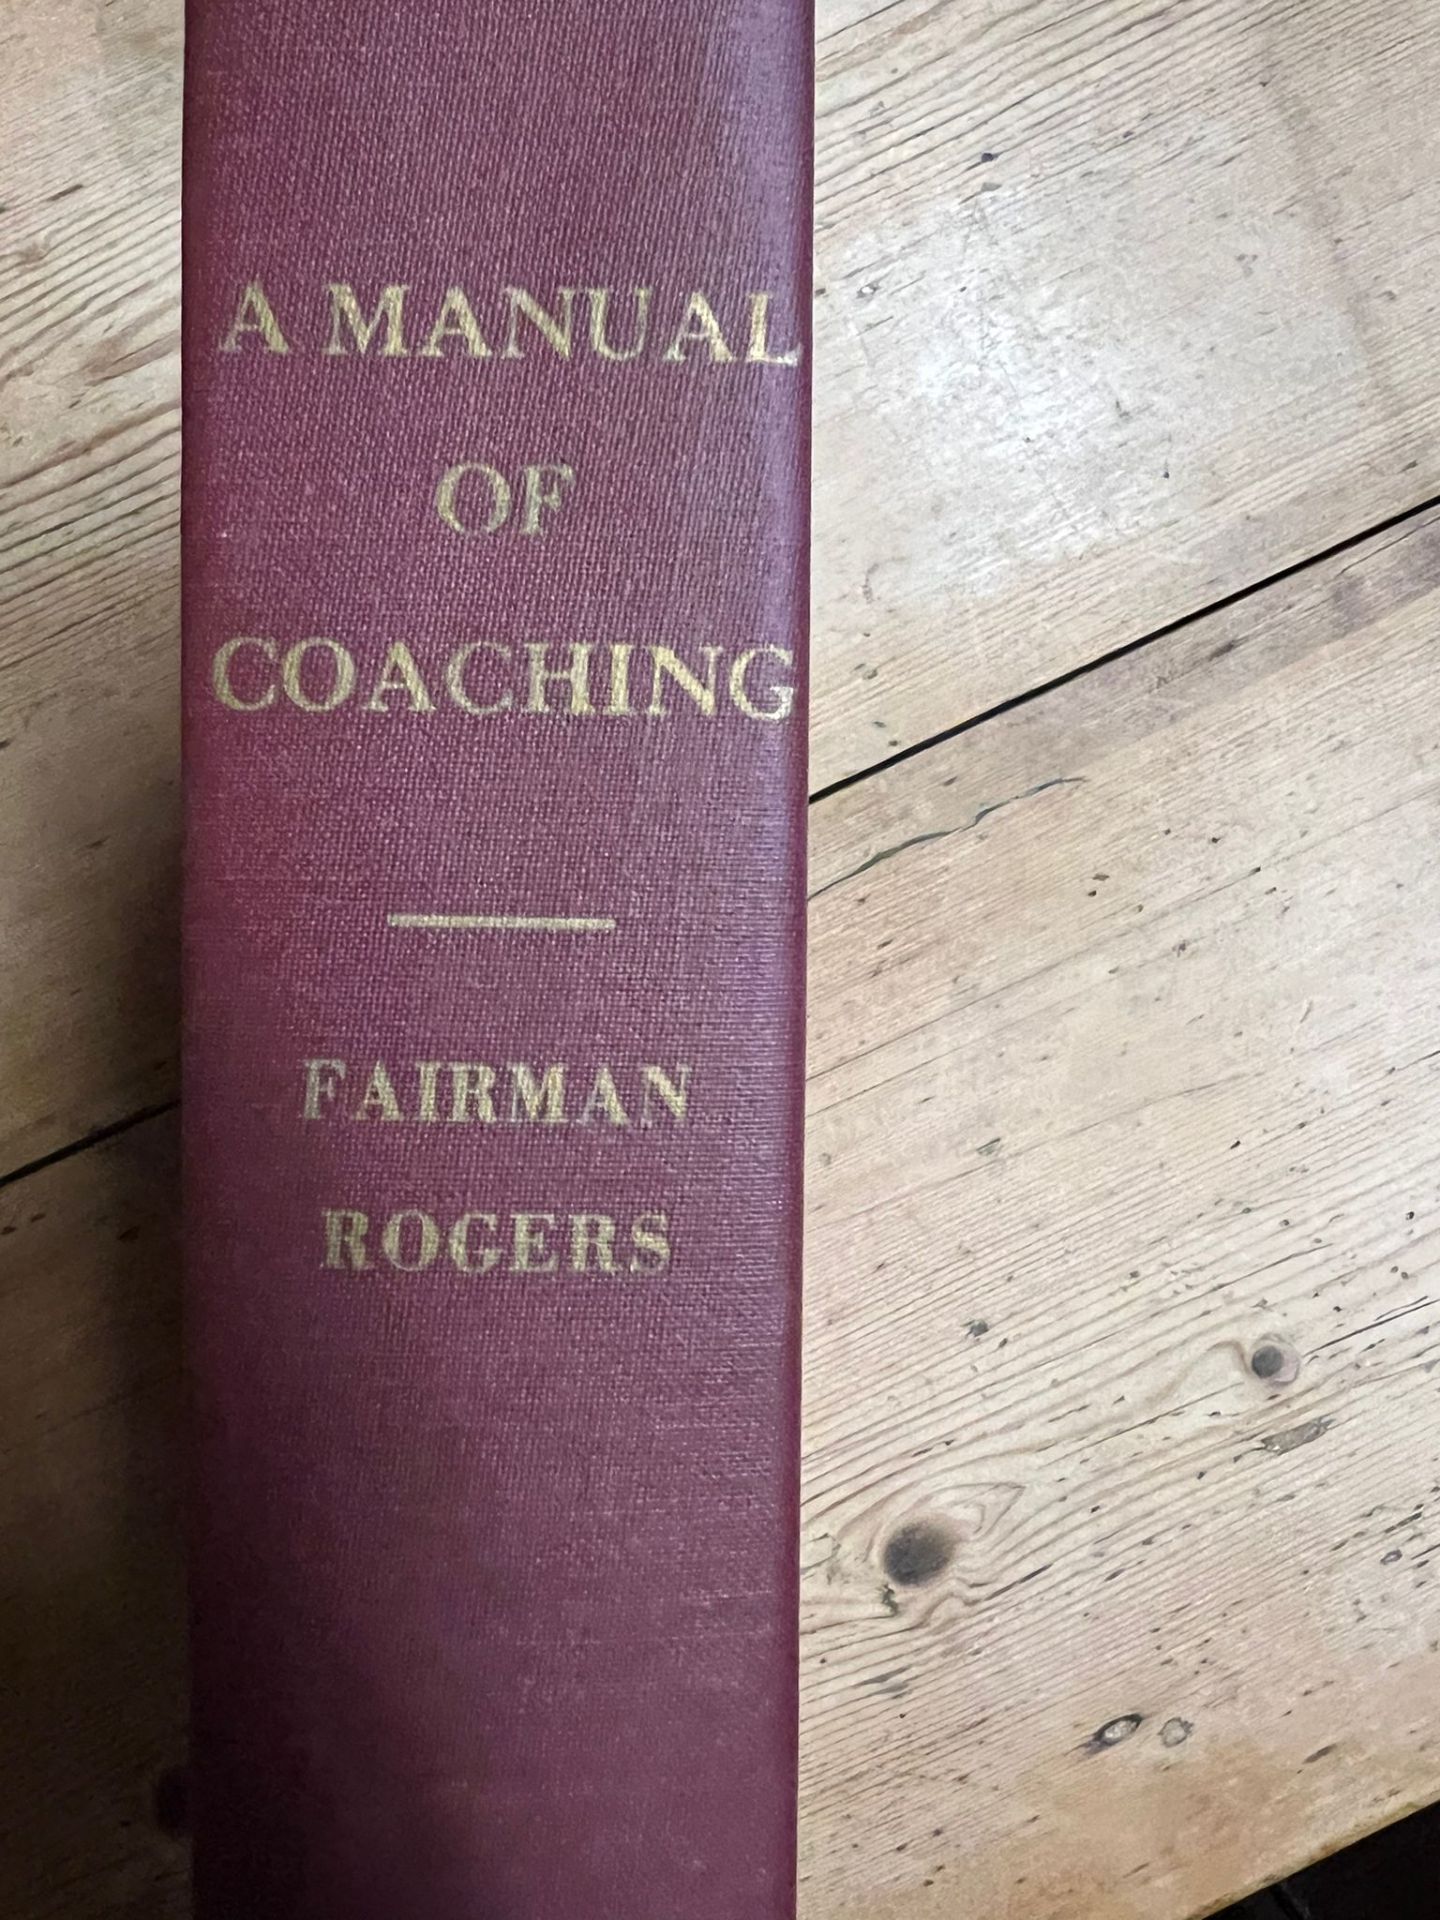 A Manual of Coaching by Fairman Rogers